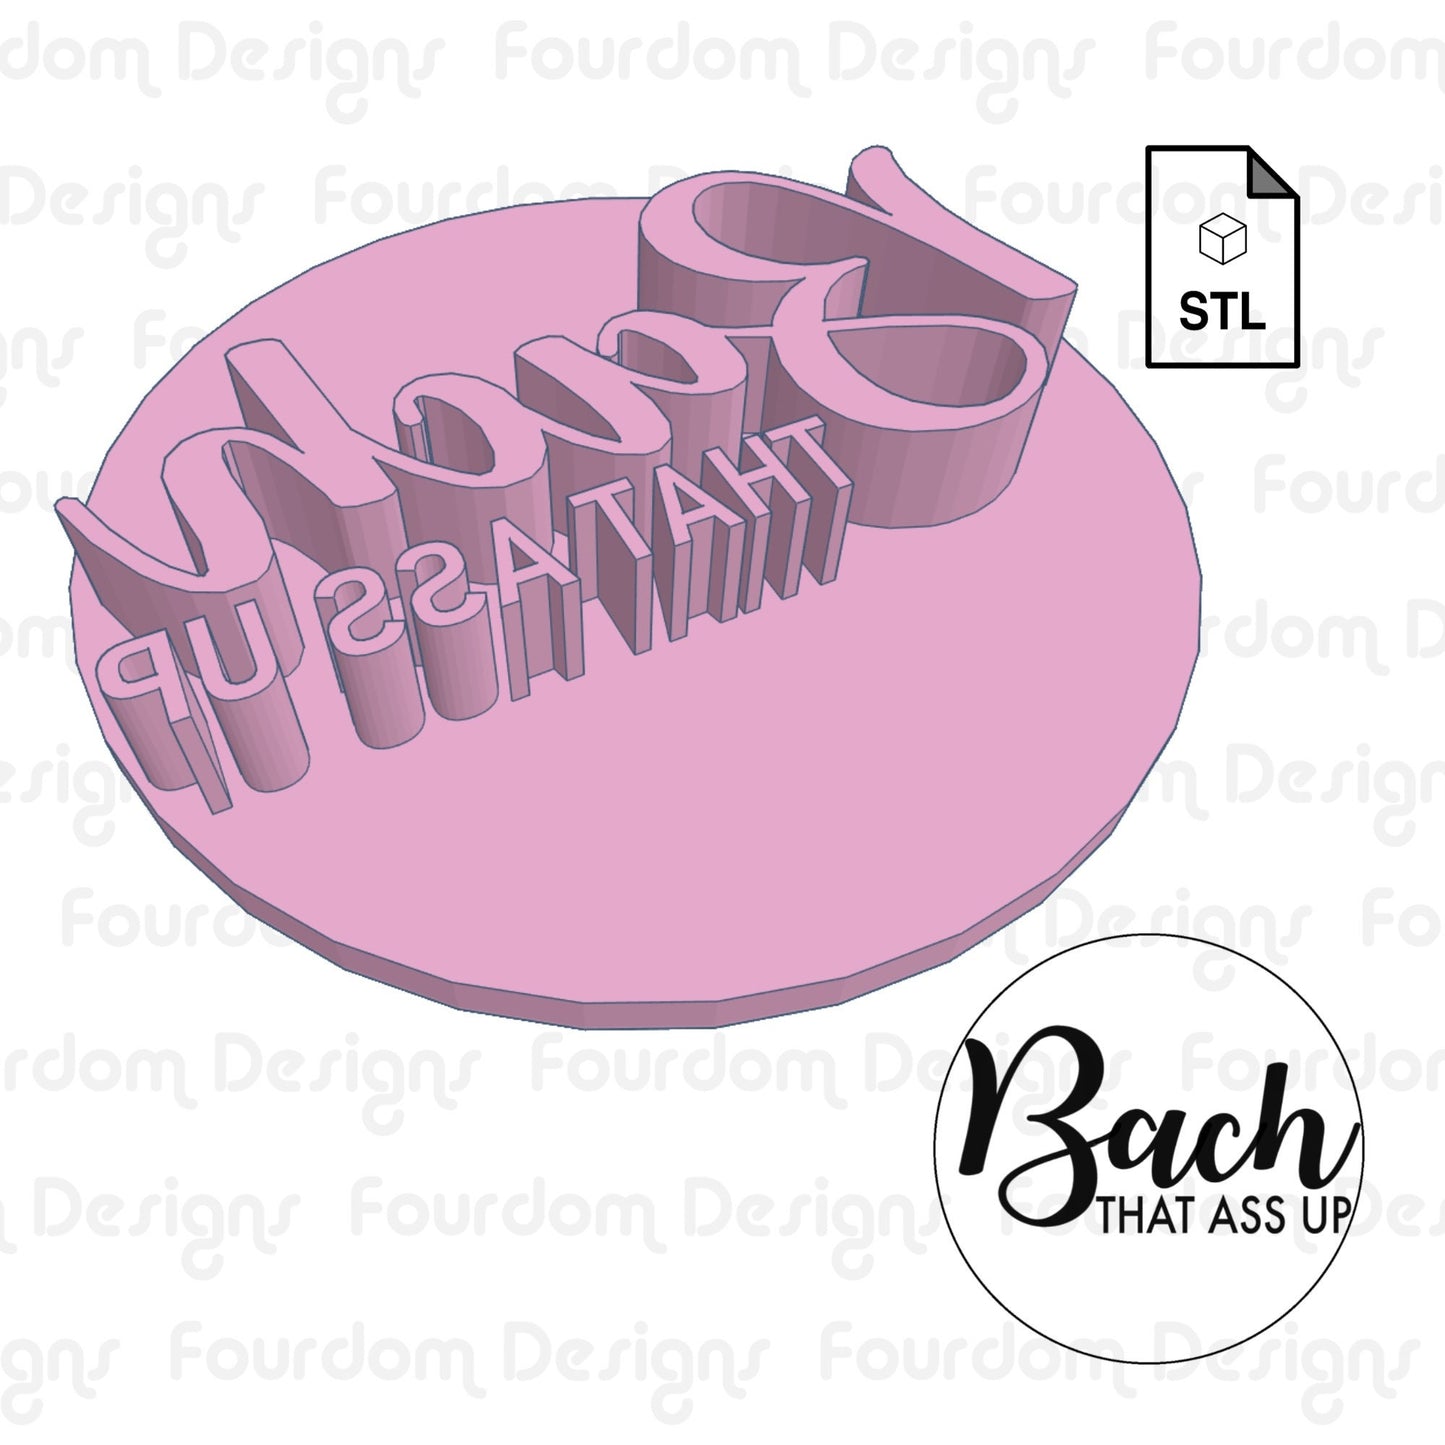 Bach That Ass Up Cookie Imprint Digital Download STL File for Cookie Cutter Fondant Cutter Clay Cutter 3D Model for 3D Printing